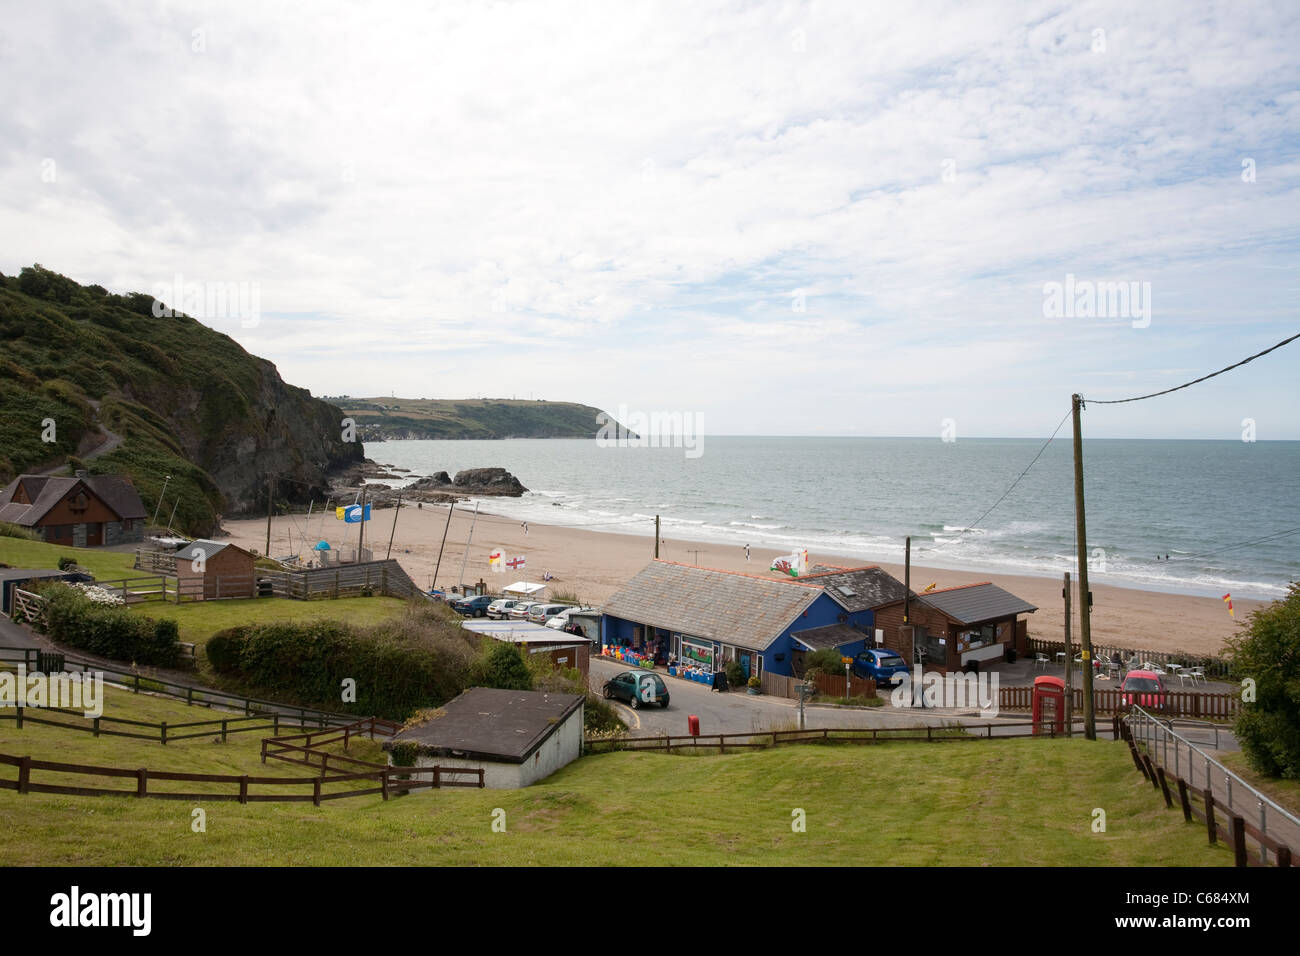 Tresaith, coastal village in the Welsh county of Ceredigion, West Wales. Photo:Jeff Gilbert Stock Photo